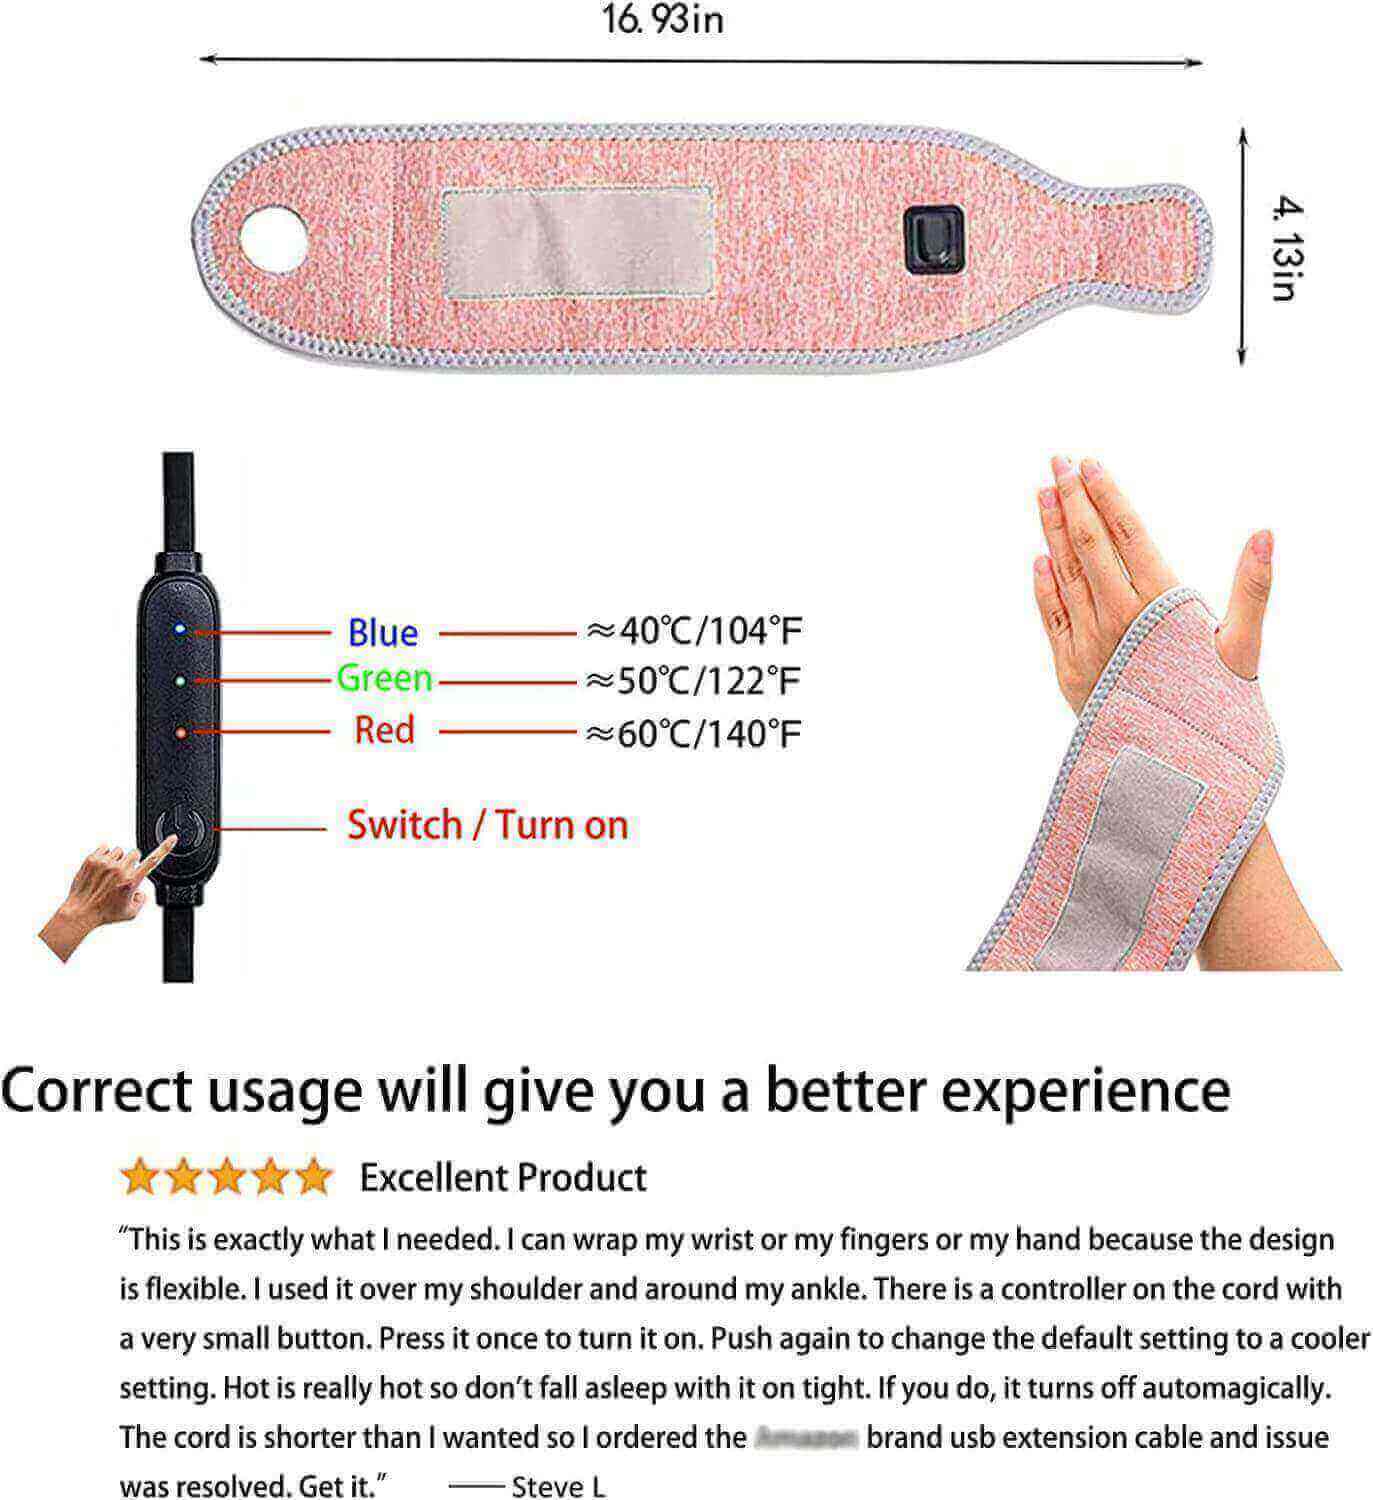 2 Electric Heating Pads for Wrist & Hand, temperature changing with colors